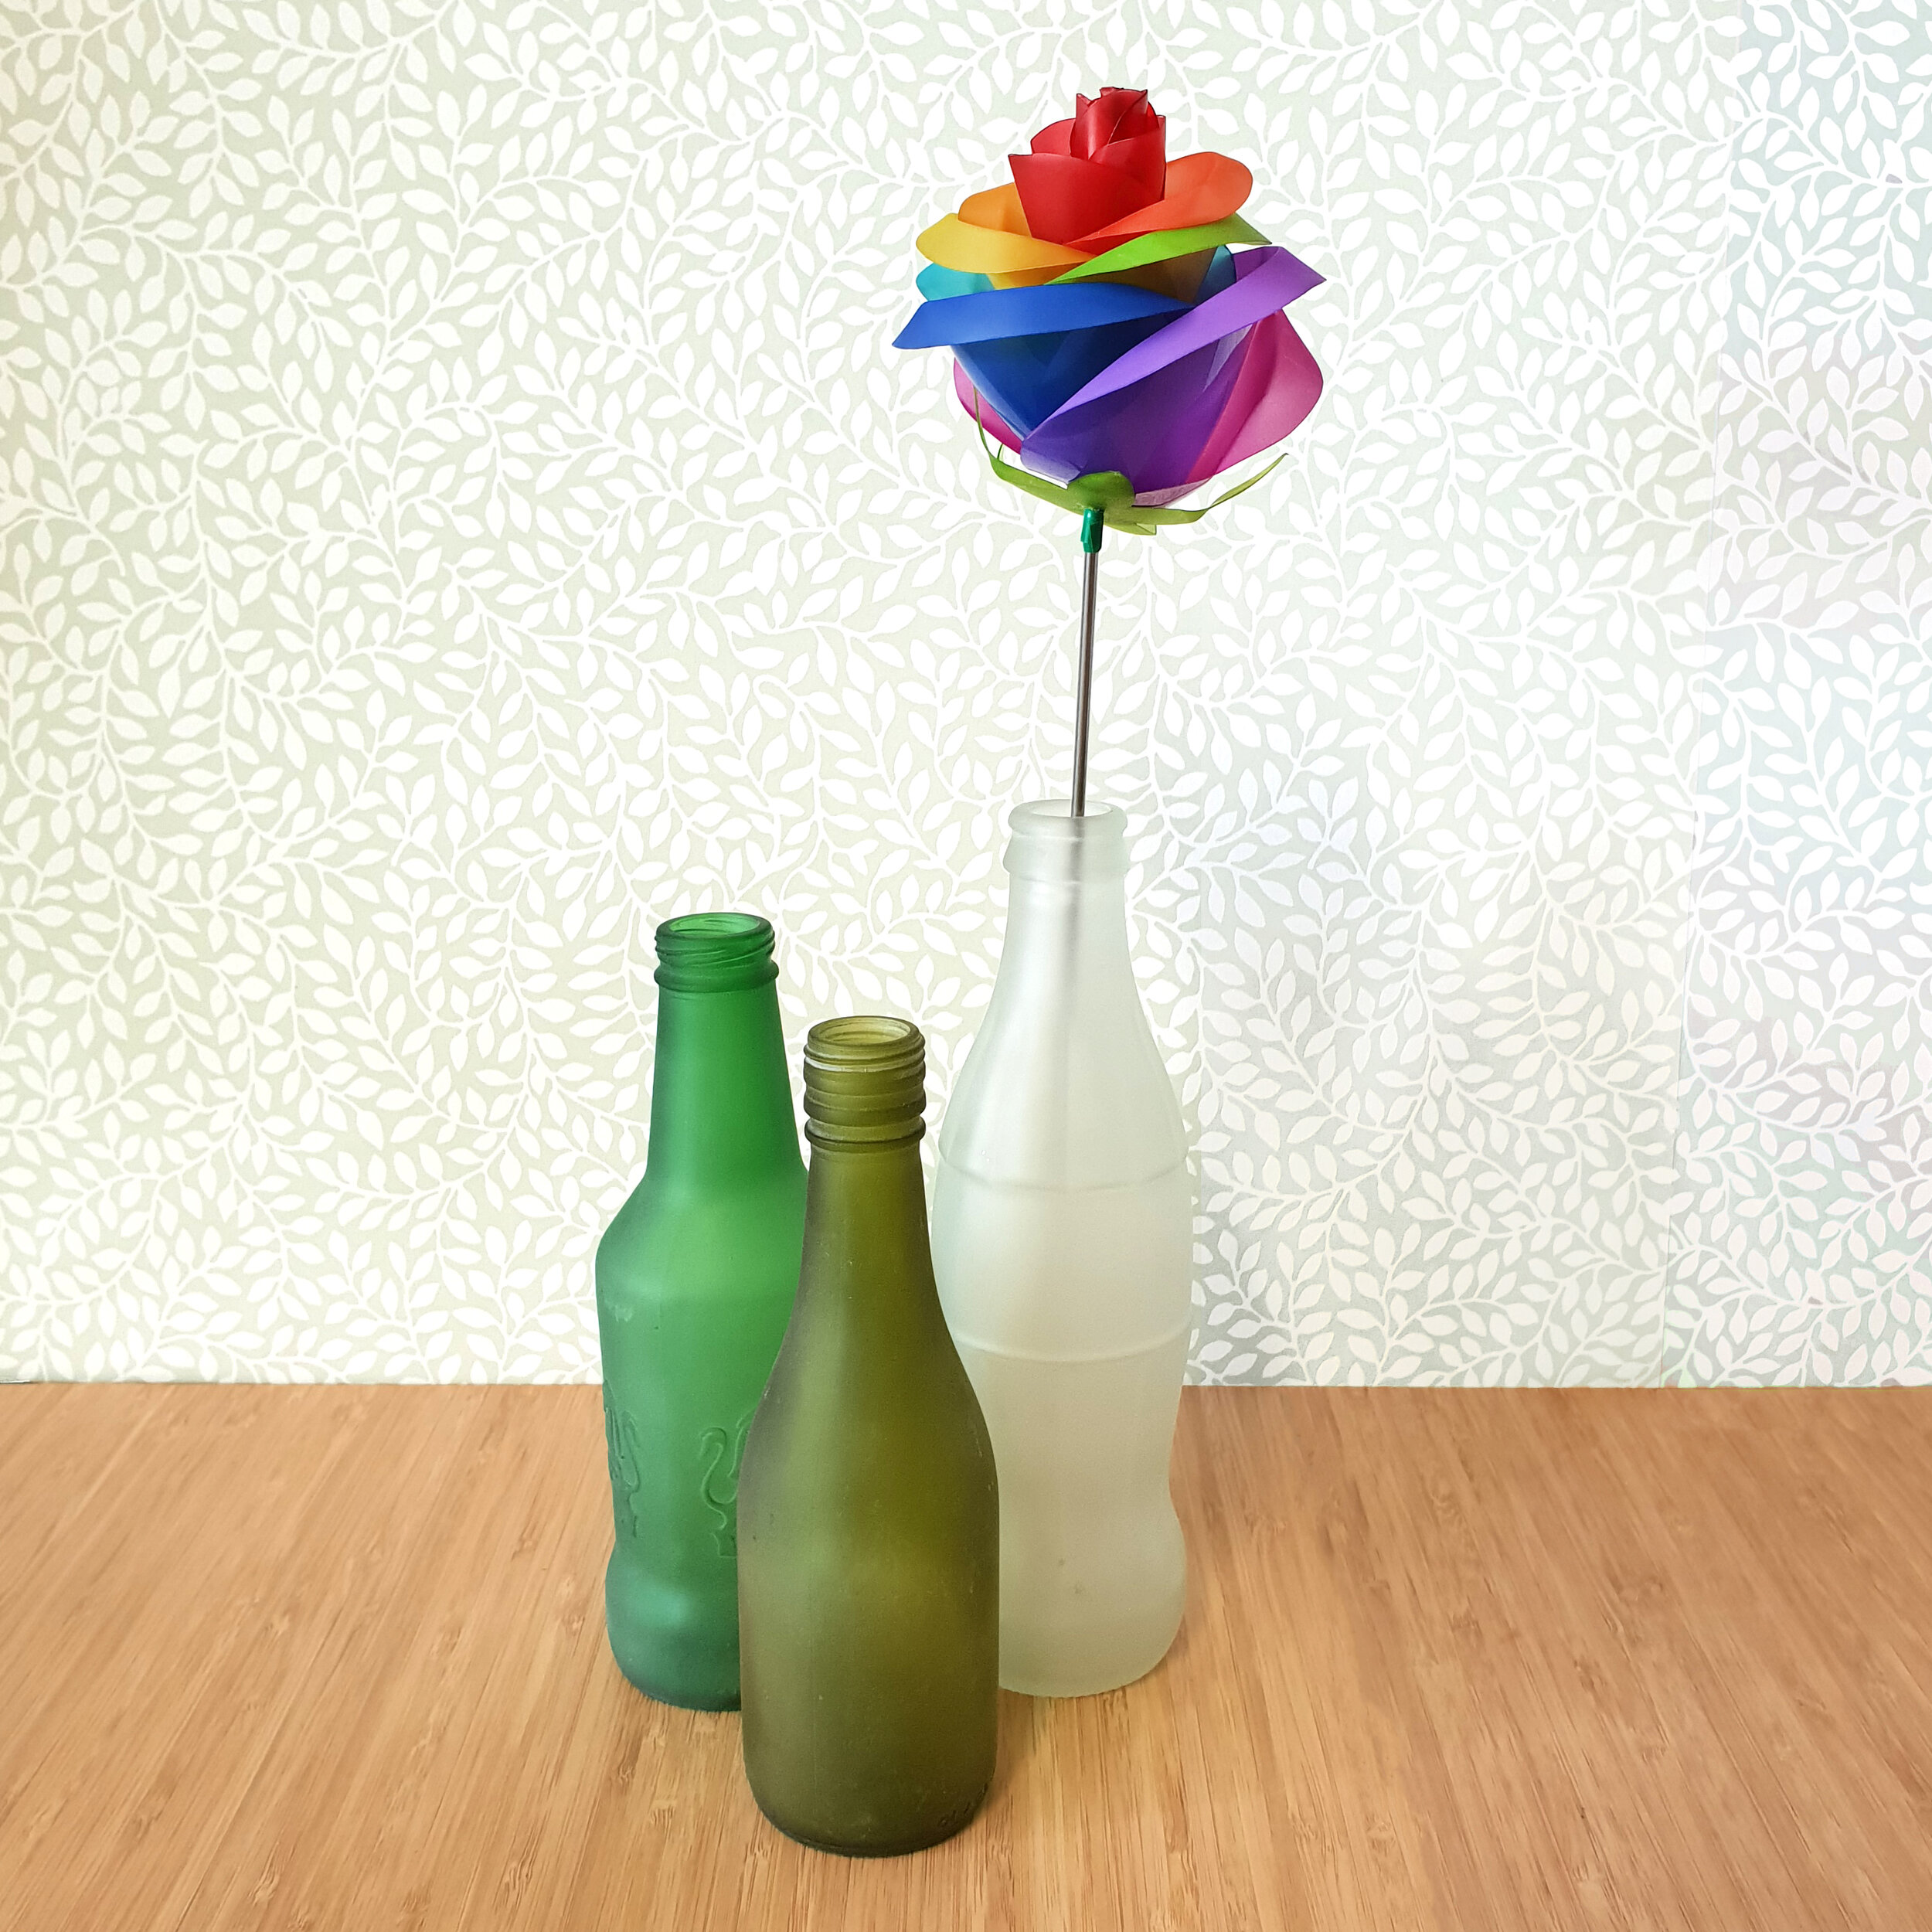 Rainbow Roses upcycled bottle eco friendly vibrant mothers day gift 